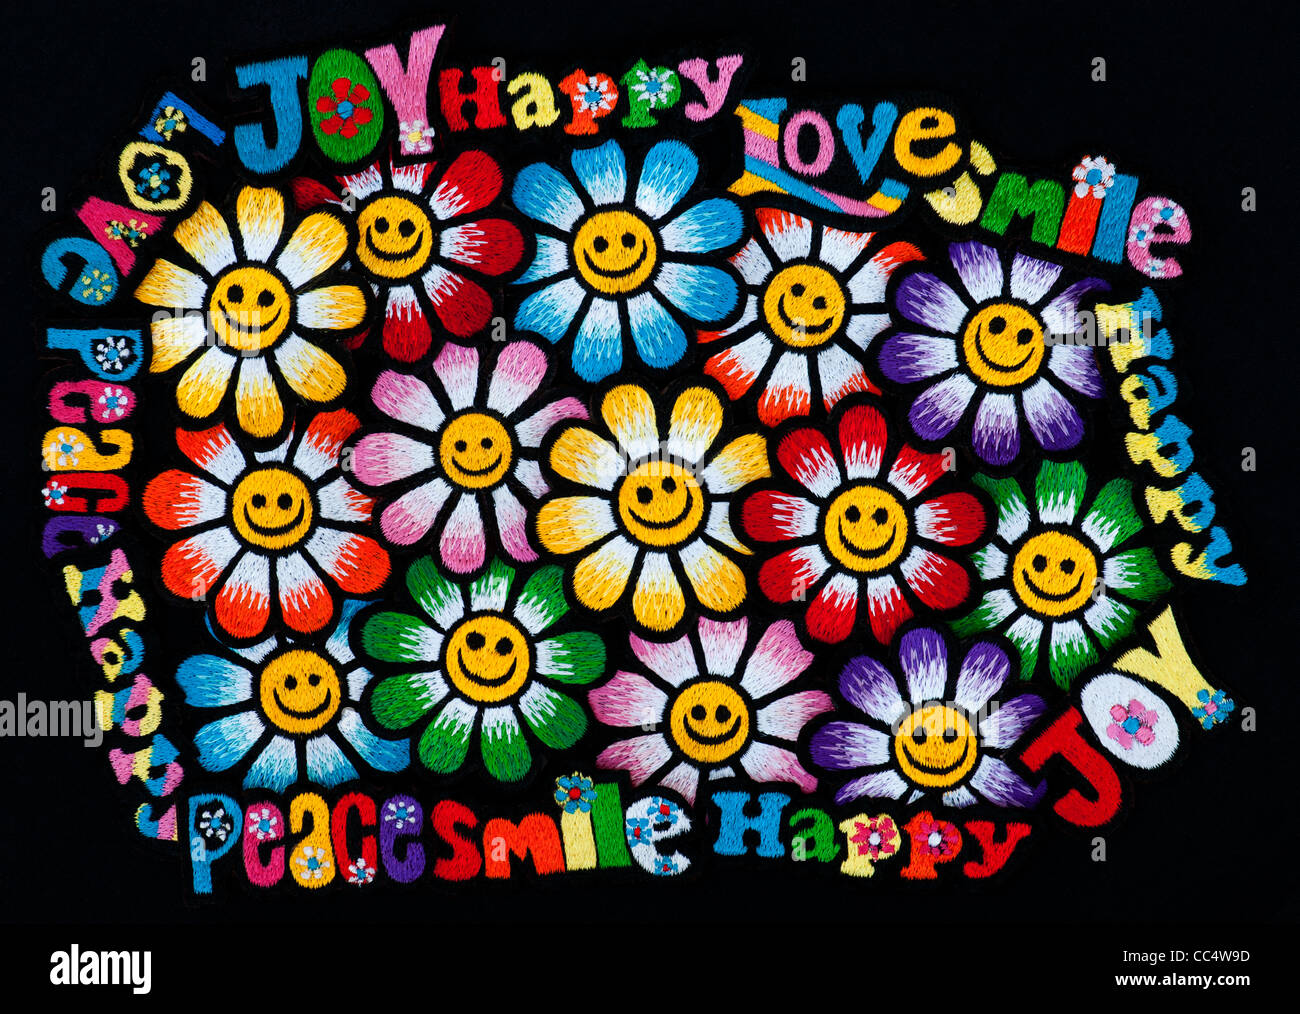 Embroidery iron on patches of Multicoloured Love, Peace, Happy, Smile, Joy, Groovy words with flowers on a black background Stock Photo